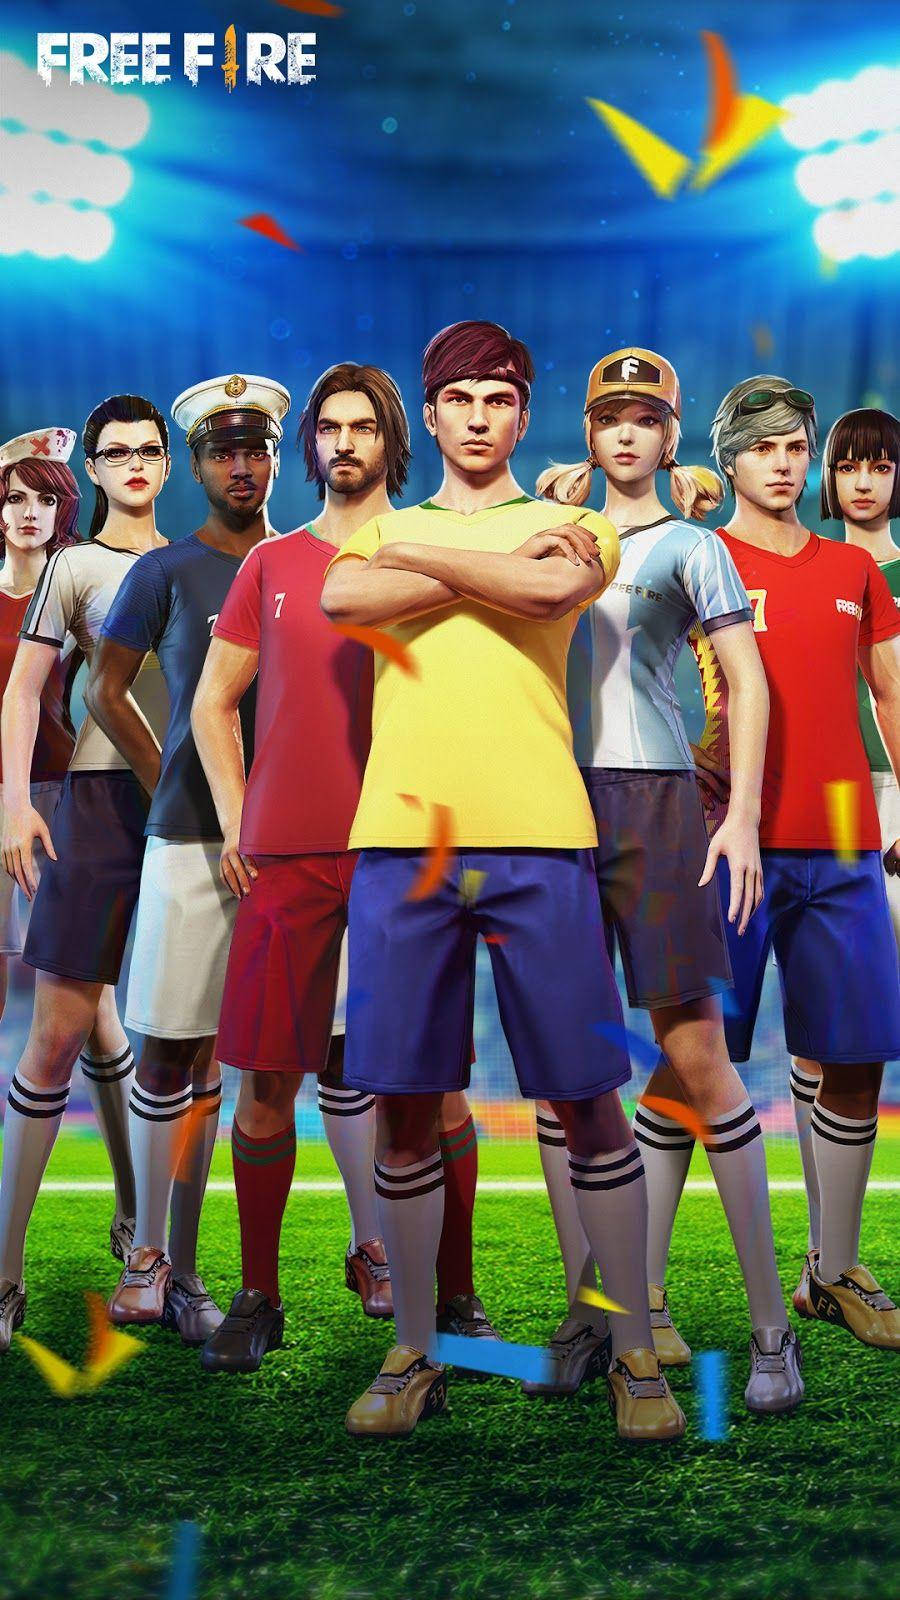 Free Fire 3d Character In Soccer Uniforms Wallpaper